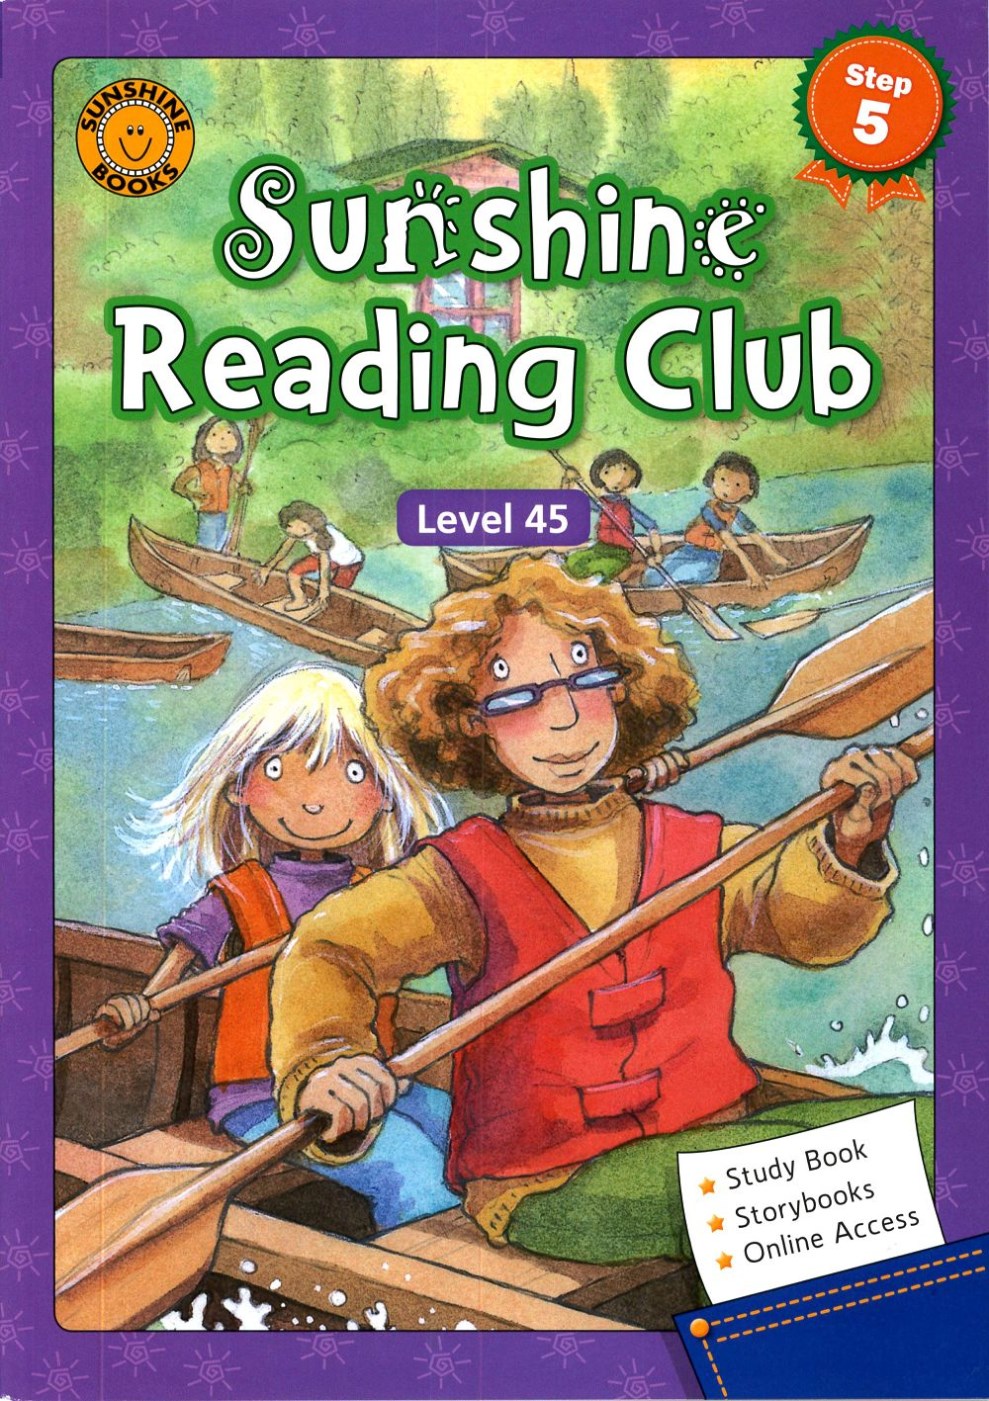 Sunshine Reading Club Level 45 Study Book with Storybooks and Online Access Code